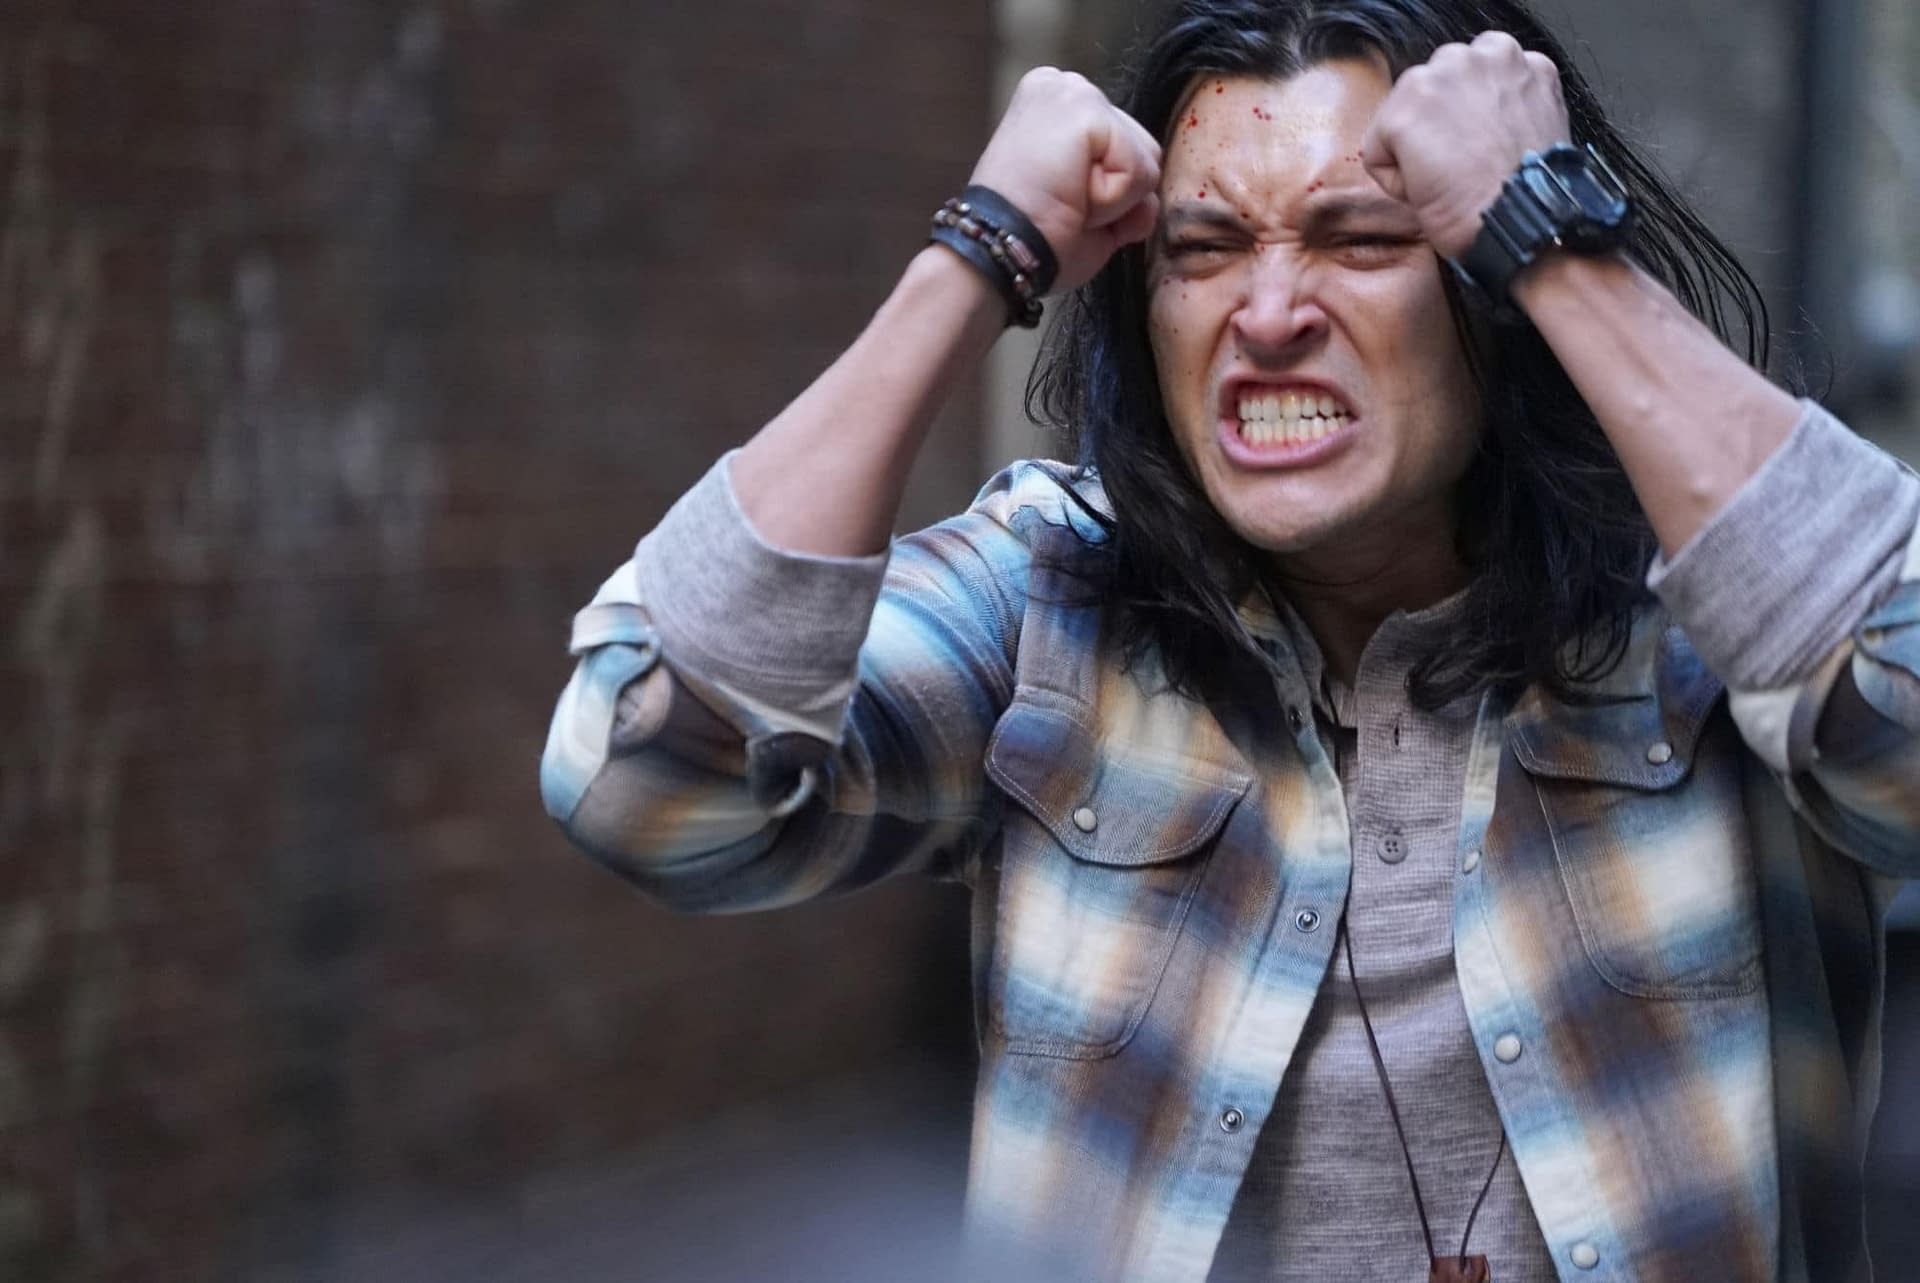 The Gifted Season 2 Episode 15: Promo, Summary, 17 Images, and the Truth Comes Out